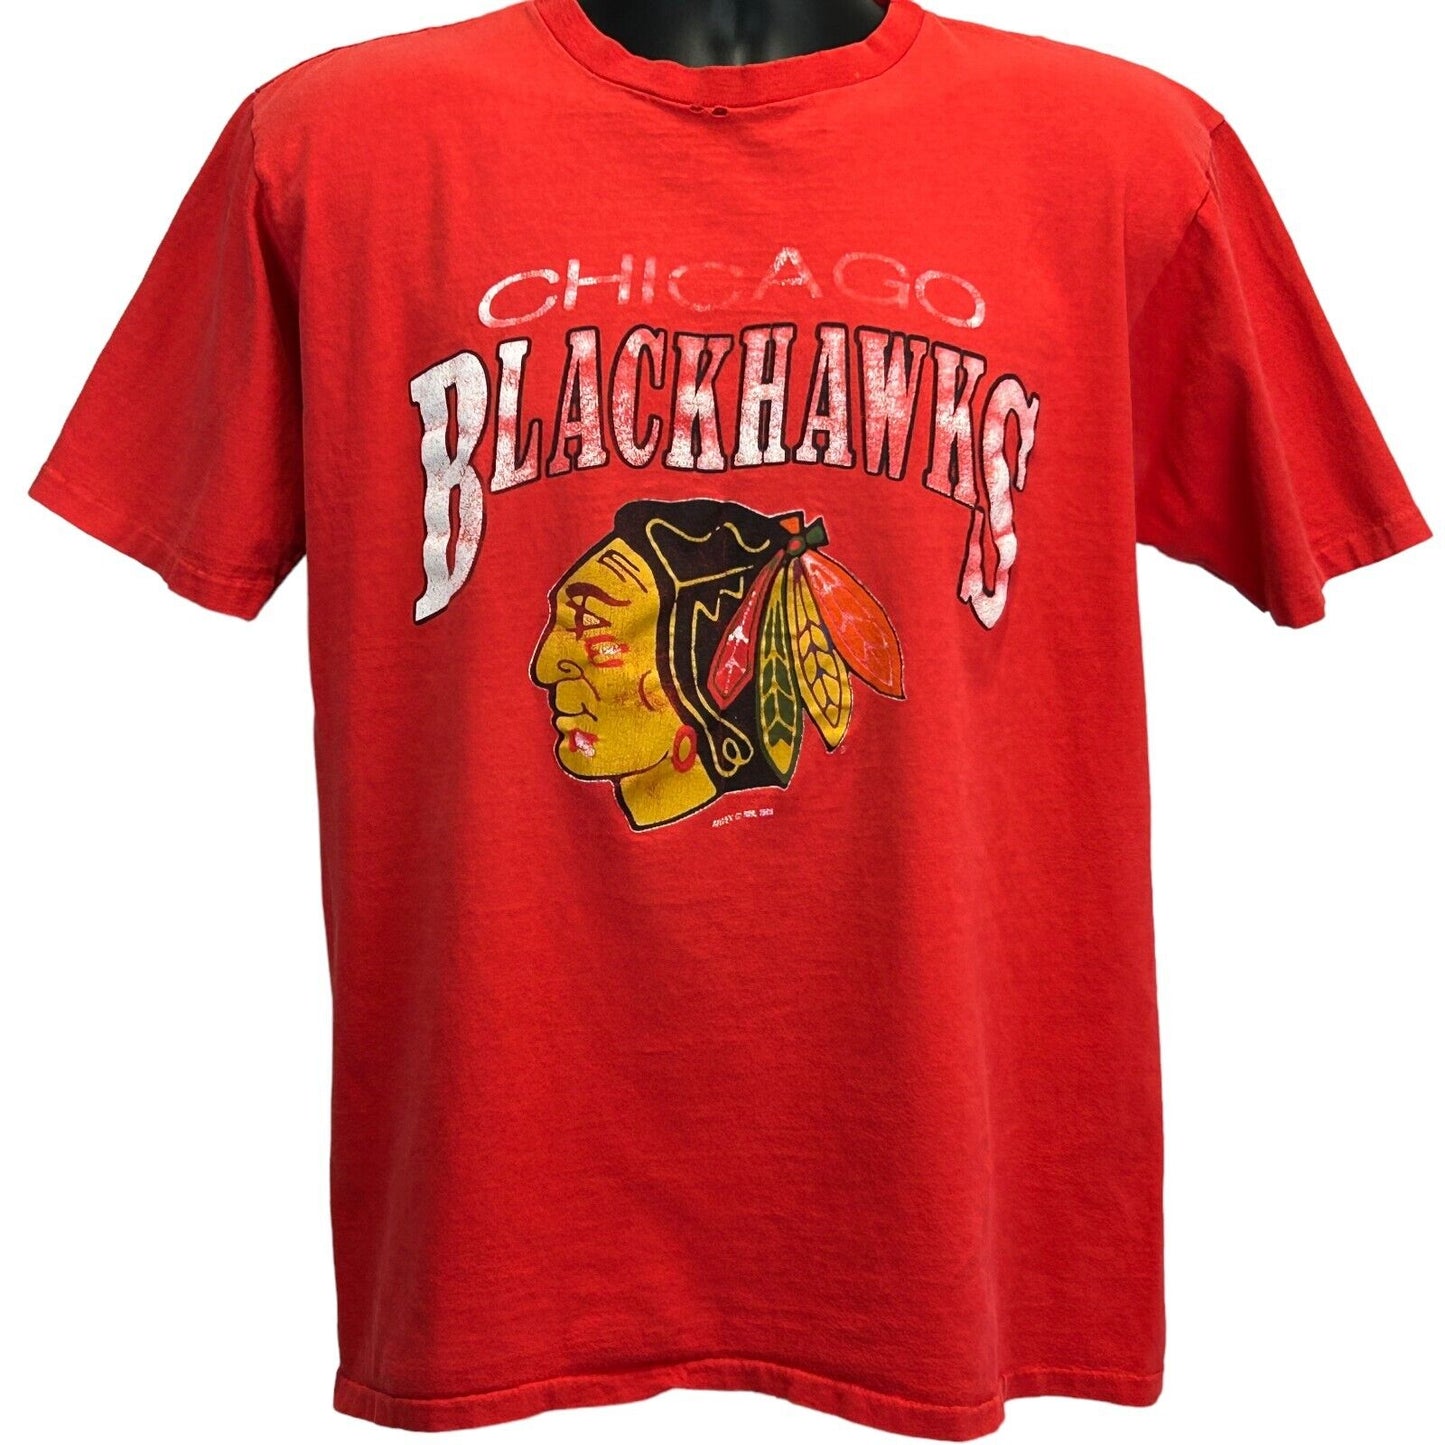 Chicago Blackhawks Vintage 80s T Shirt NHL Hockey Red Made In USA Large